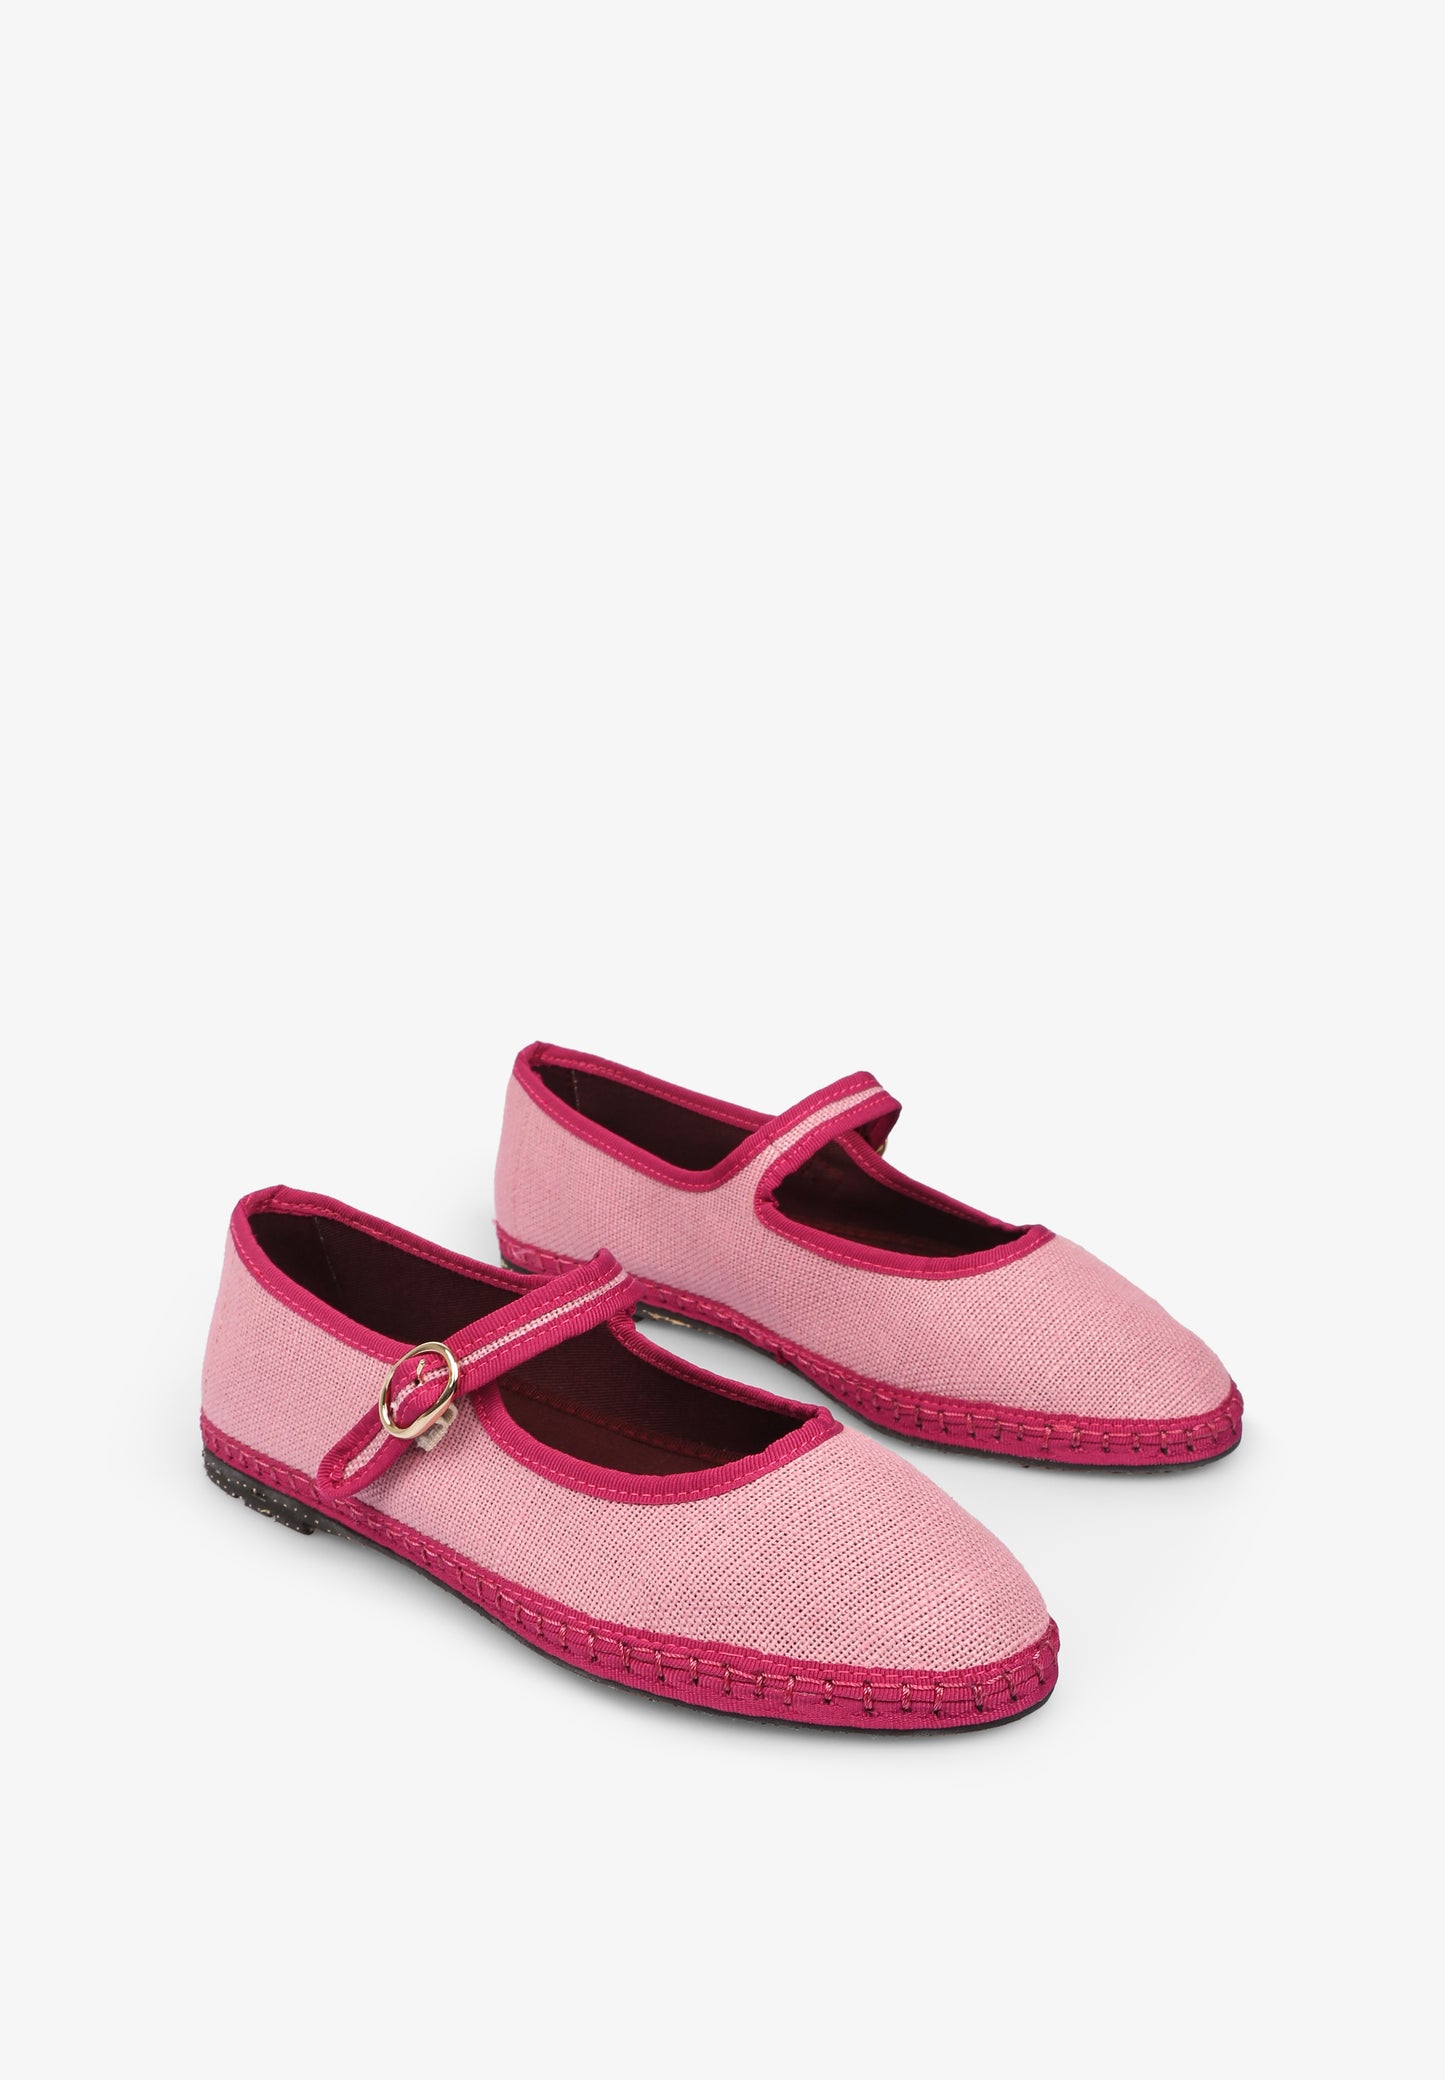 FLABELUS | SLIPPERS CATALINA